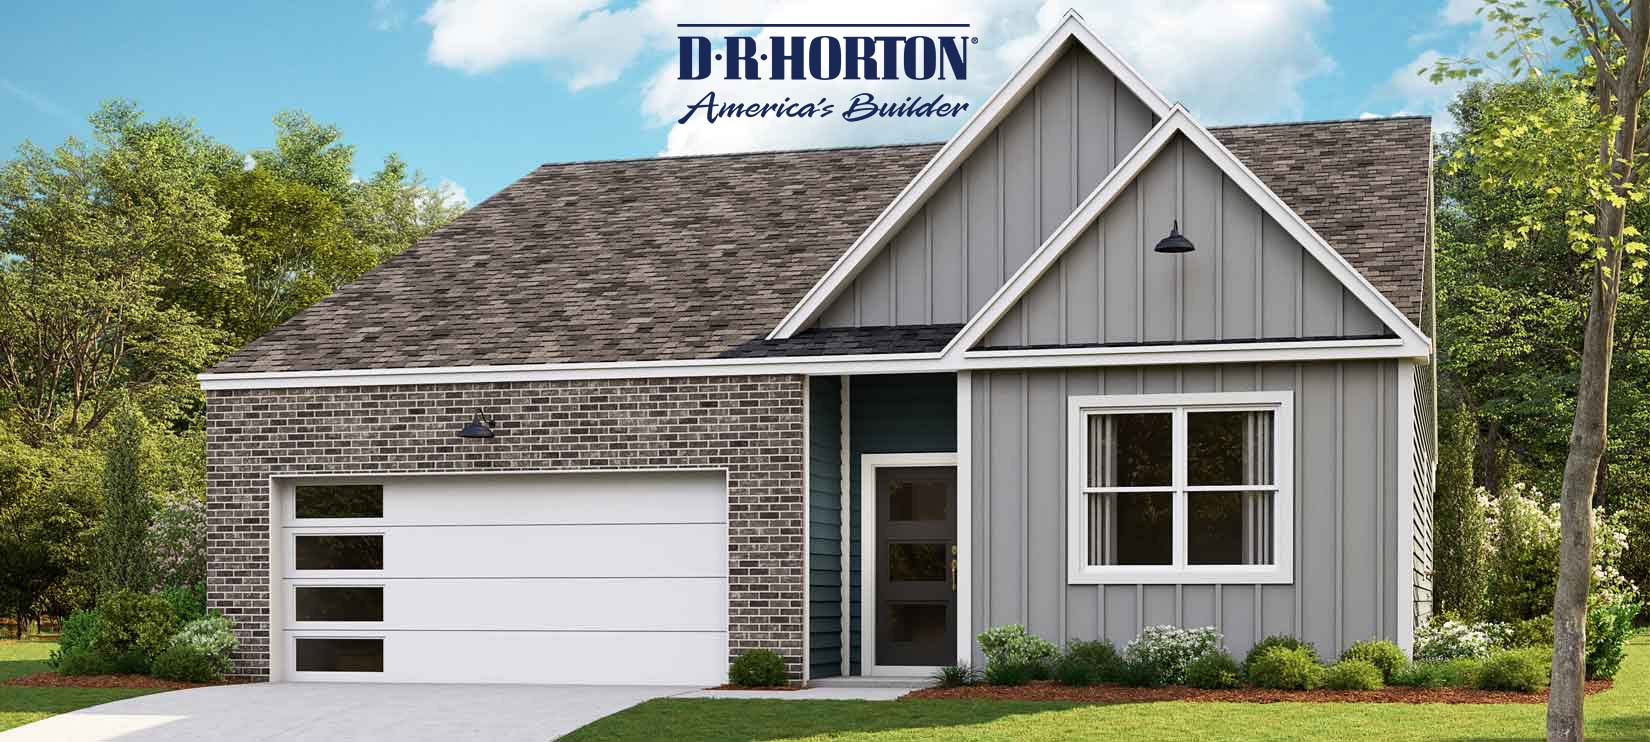 D.R. Horton Homes Coming to Nexus Master Planned Community Gallatin Tennessee